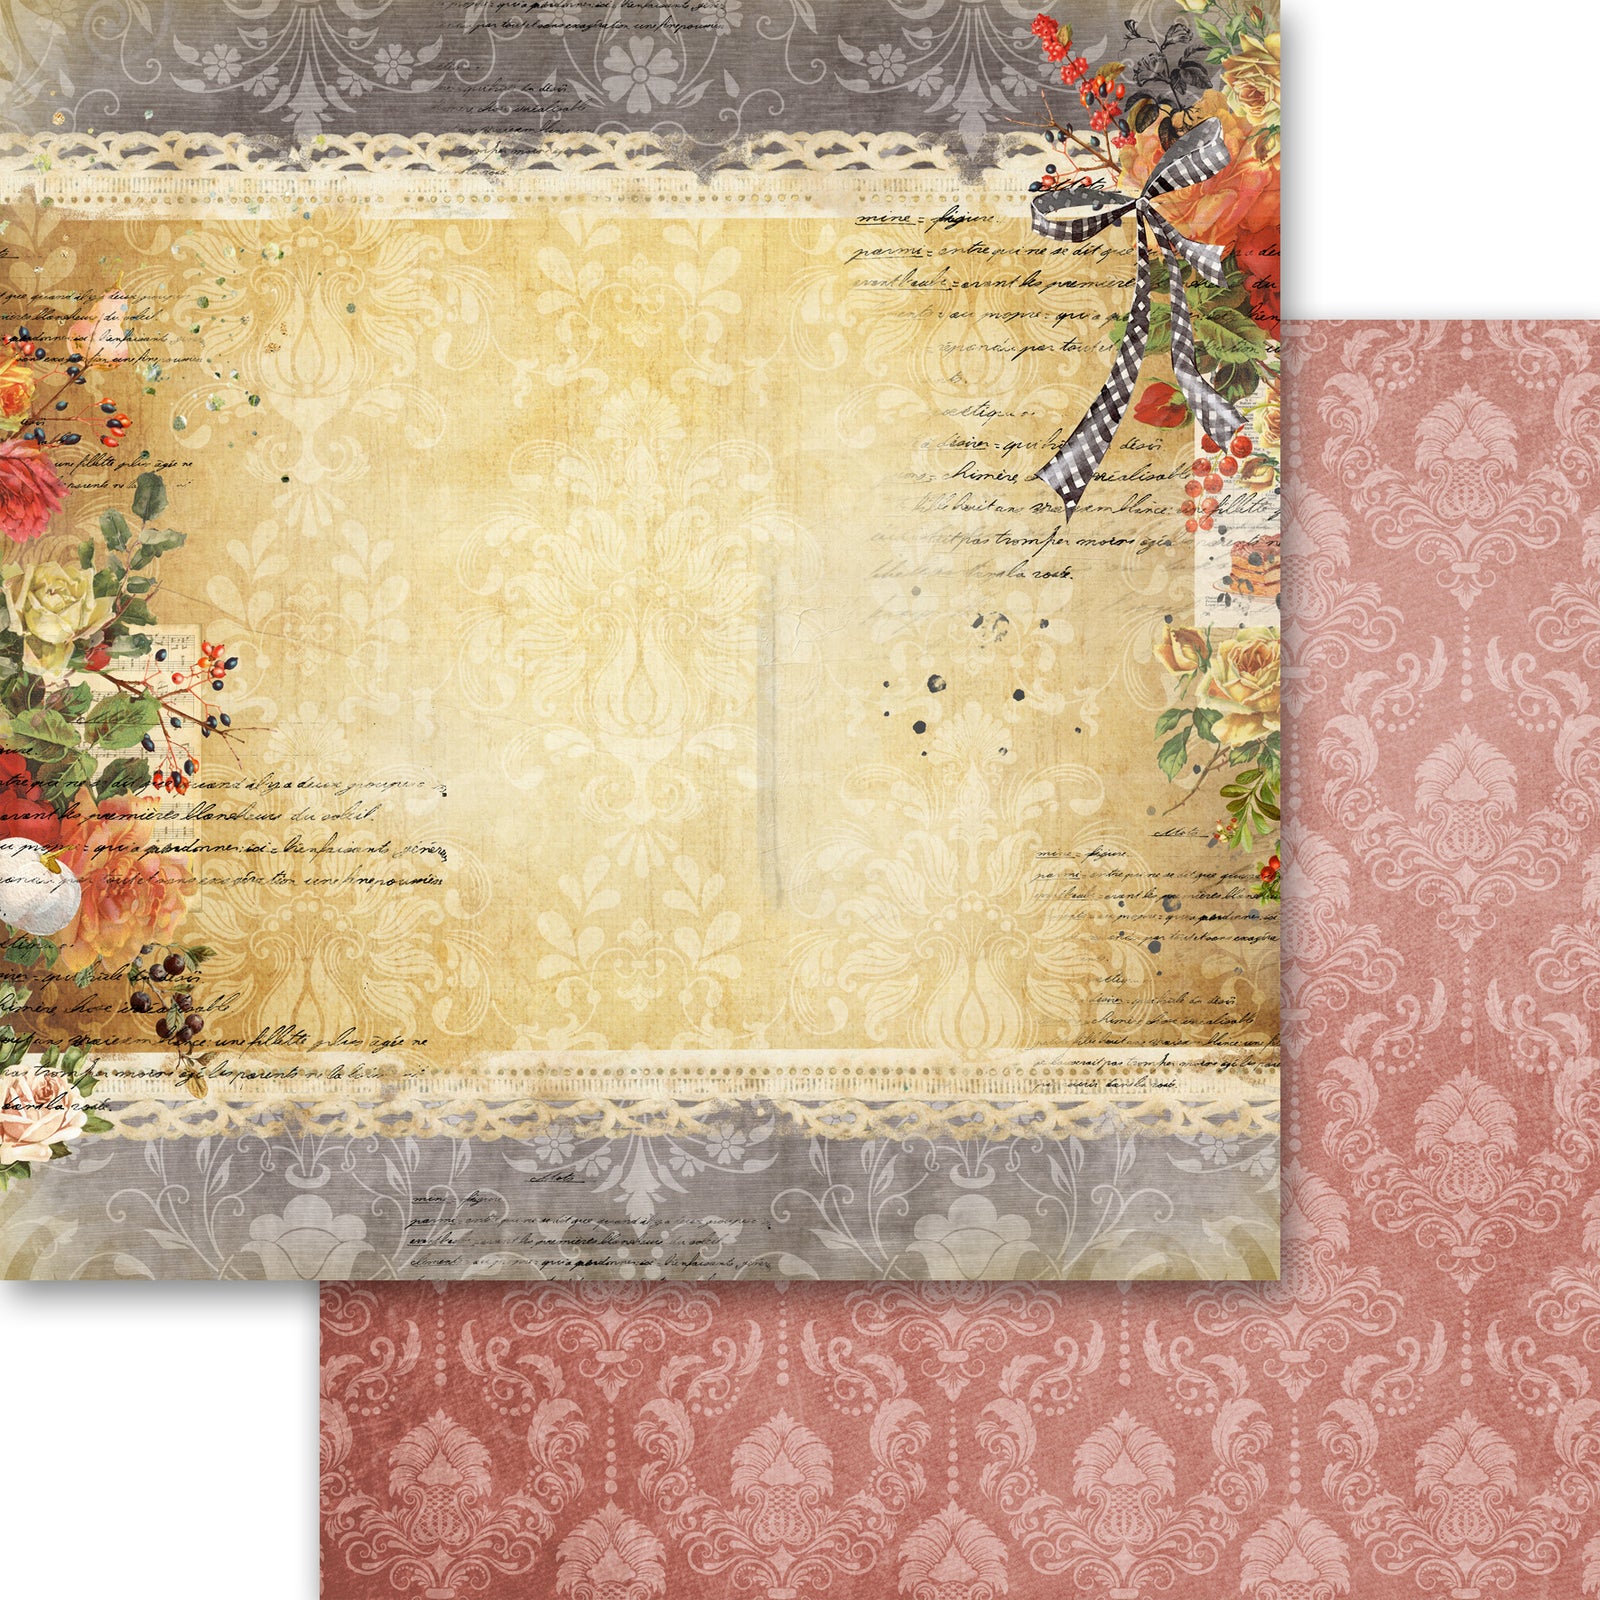 12x12 Paper Pack - Simple Style - Fall Is In The Air - Memory Place - Asuka Studio